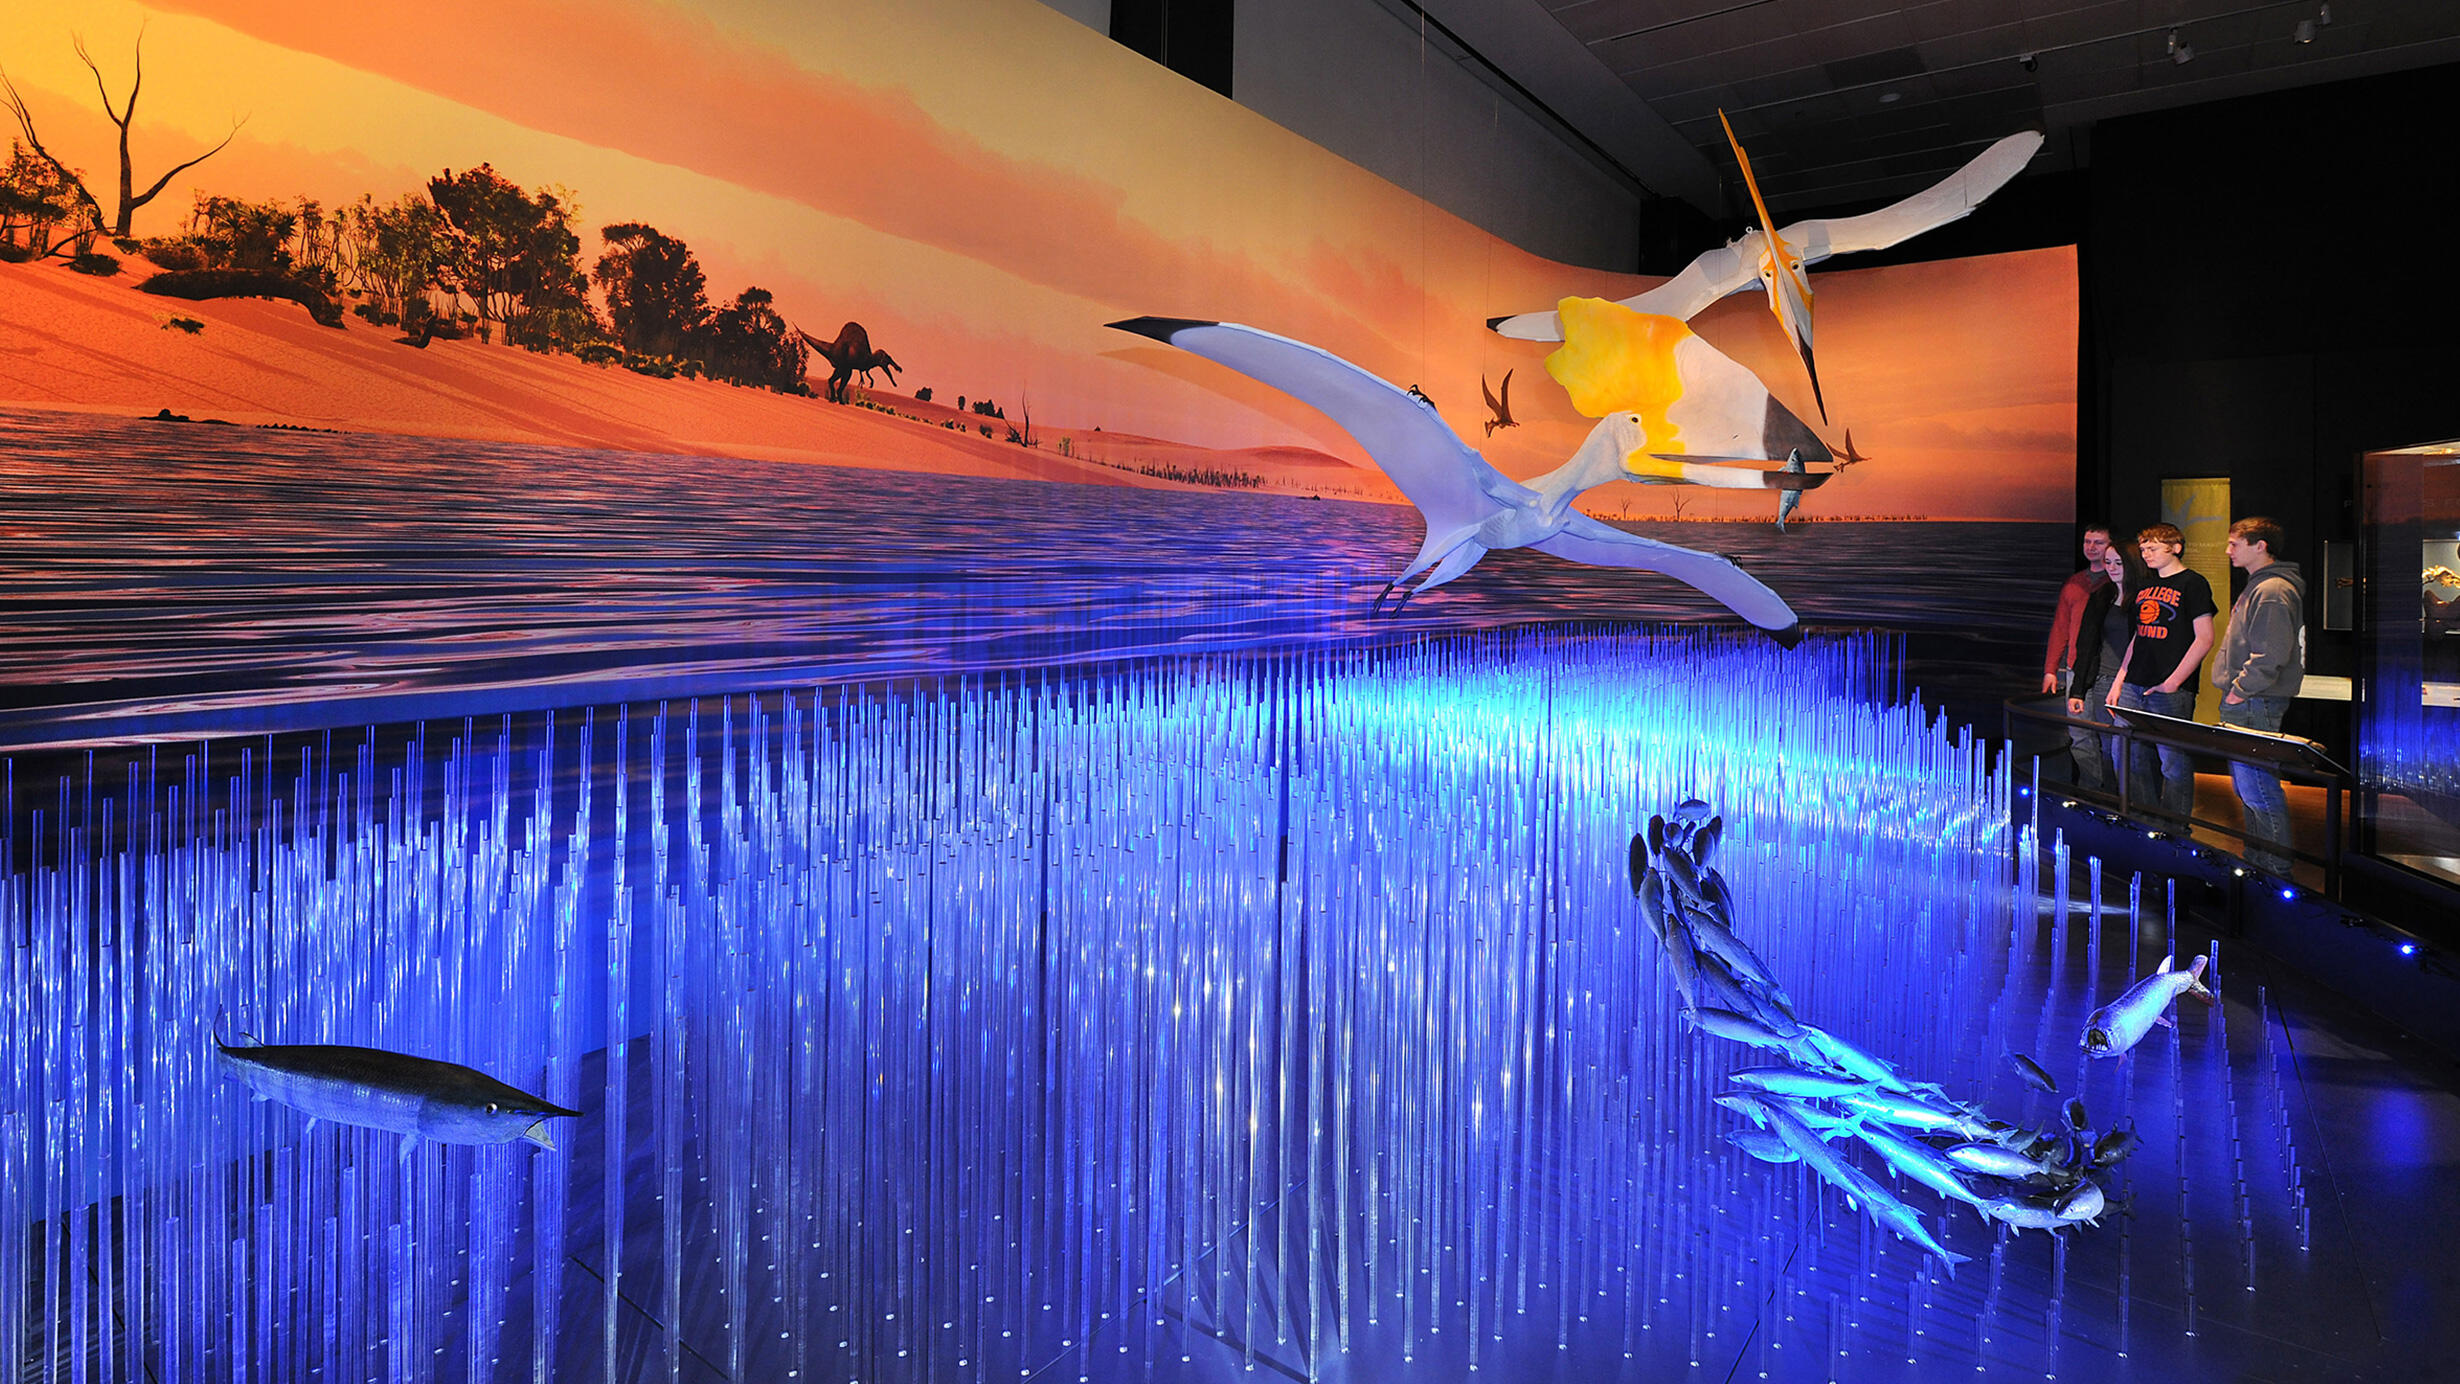 In a large diorama two models of pterosaurs with orange crests soar over a blue ocean